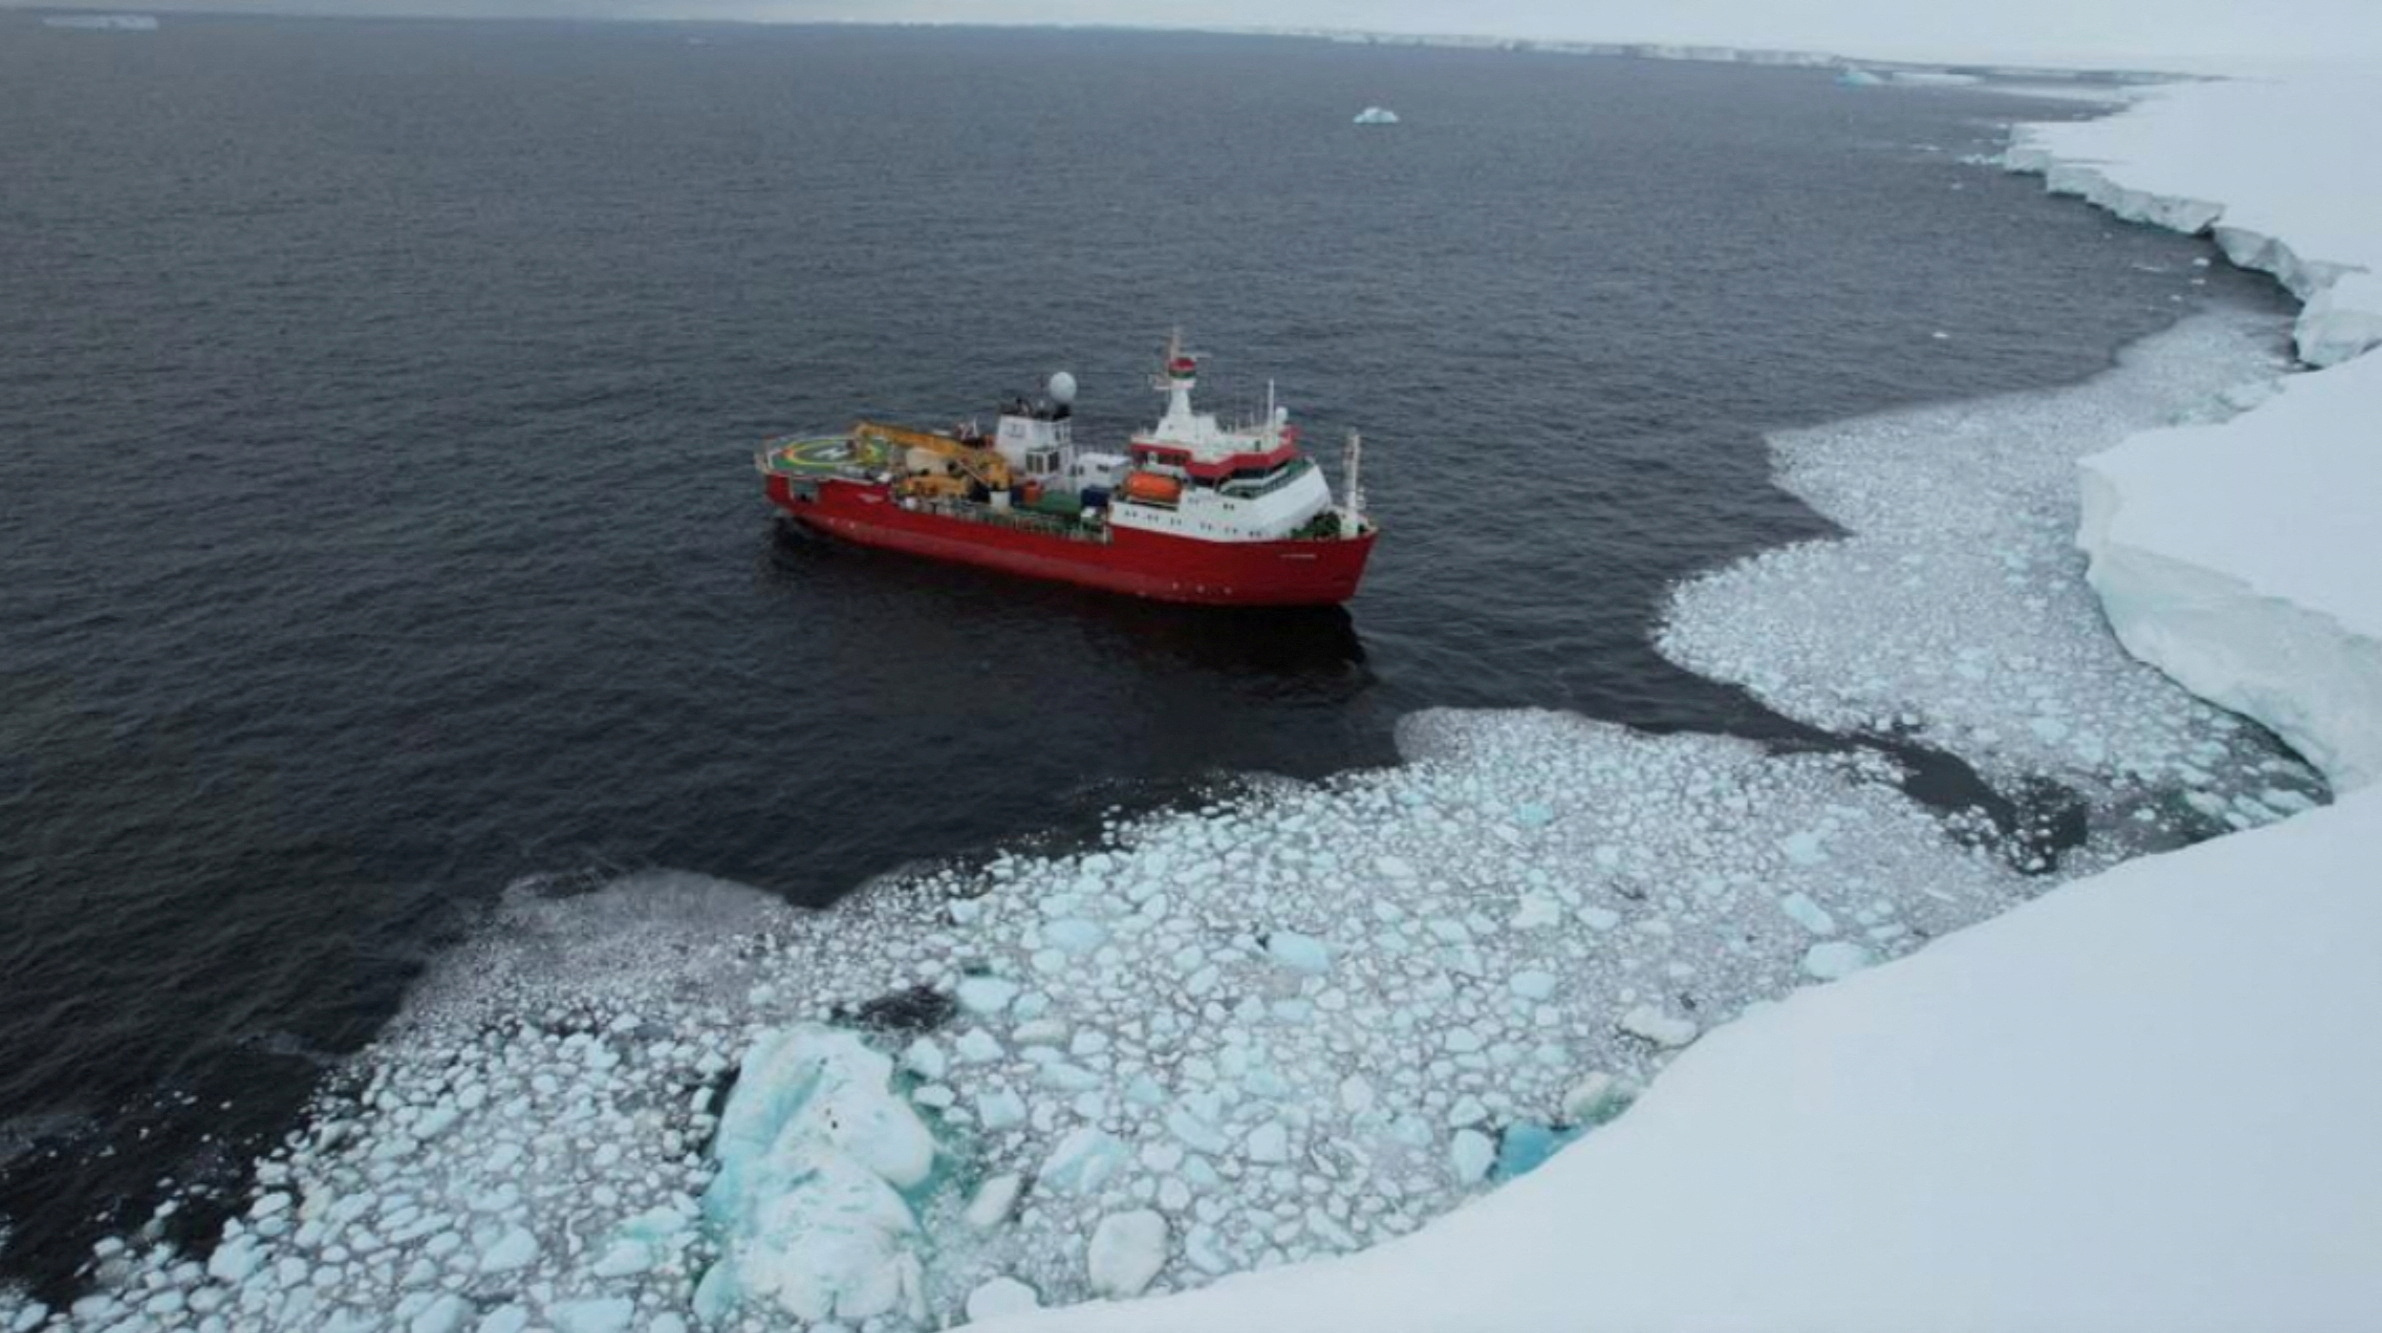 Italian ice breaker vessel Laura Bassi carrying scientists researching in the Antarctic, sails near the Bay of Wales, Antarctica. /Reuters